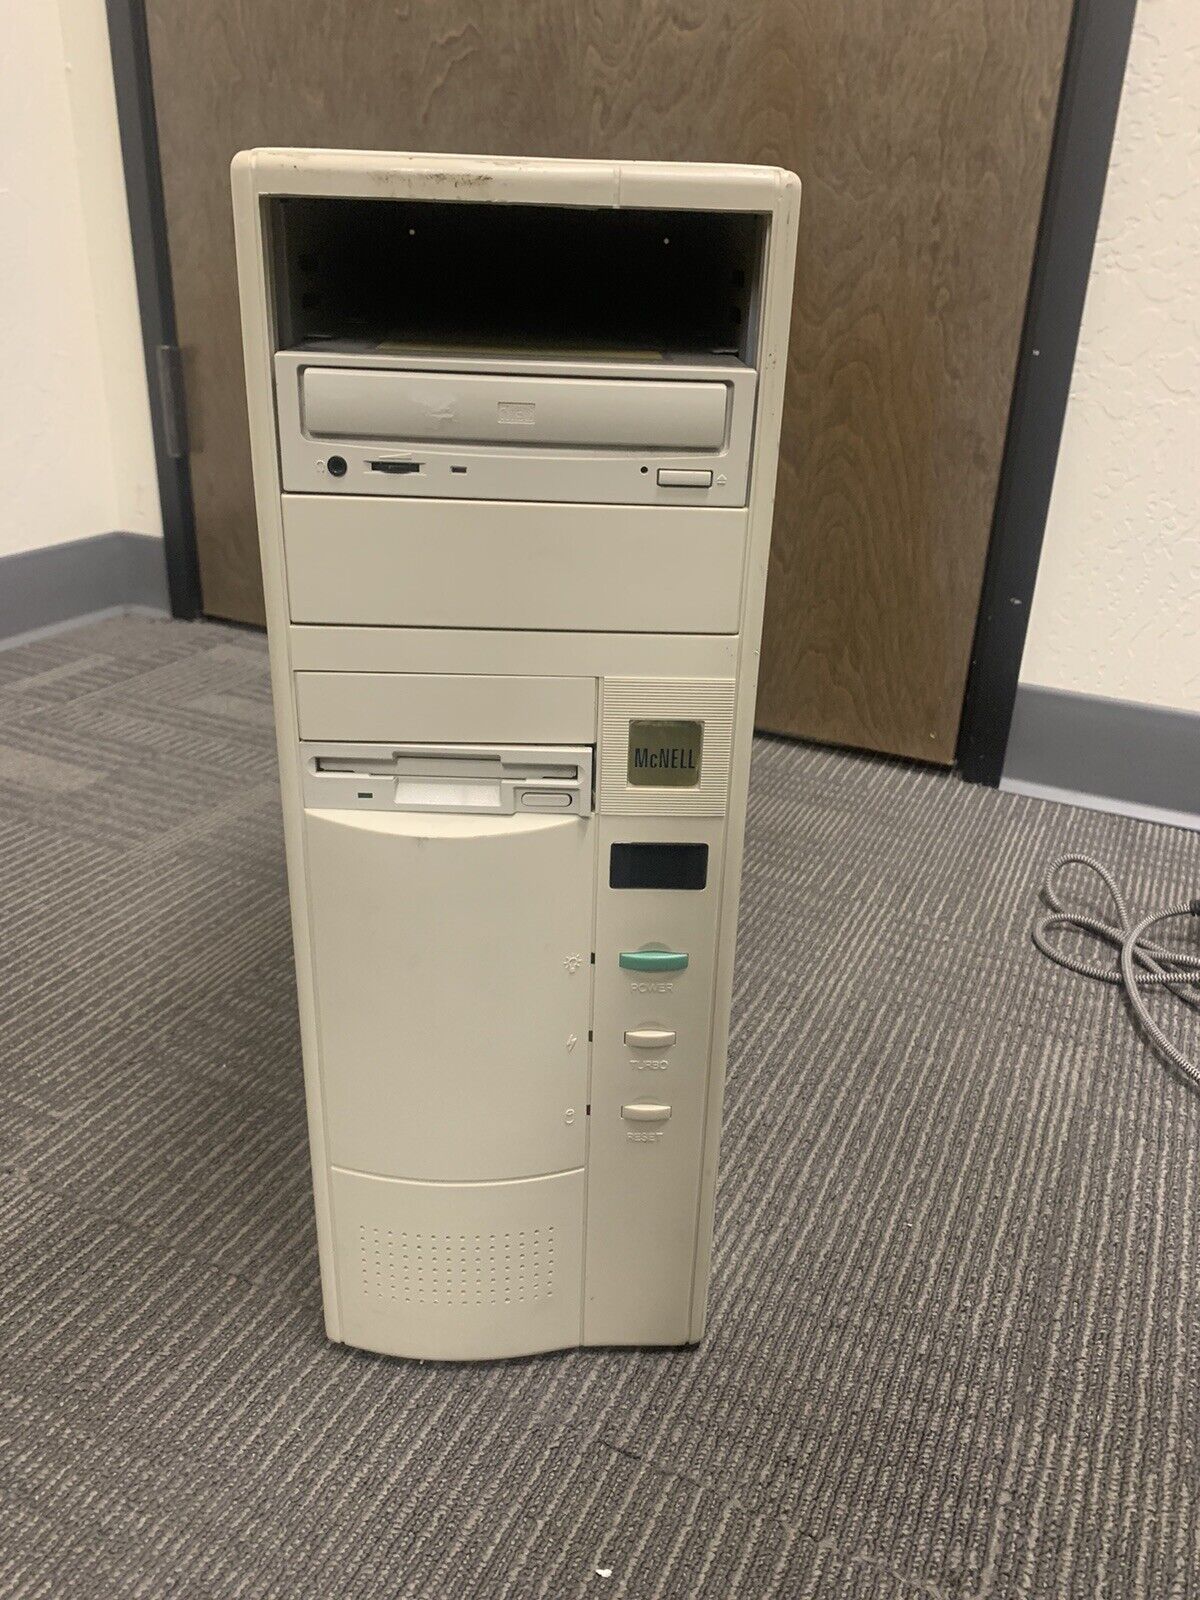 Vintage Mid AT Computer Tower Case with PSU + CD Drives/Floppy